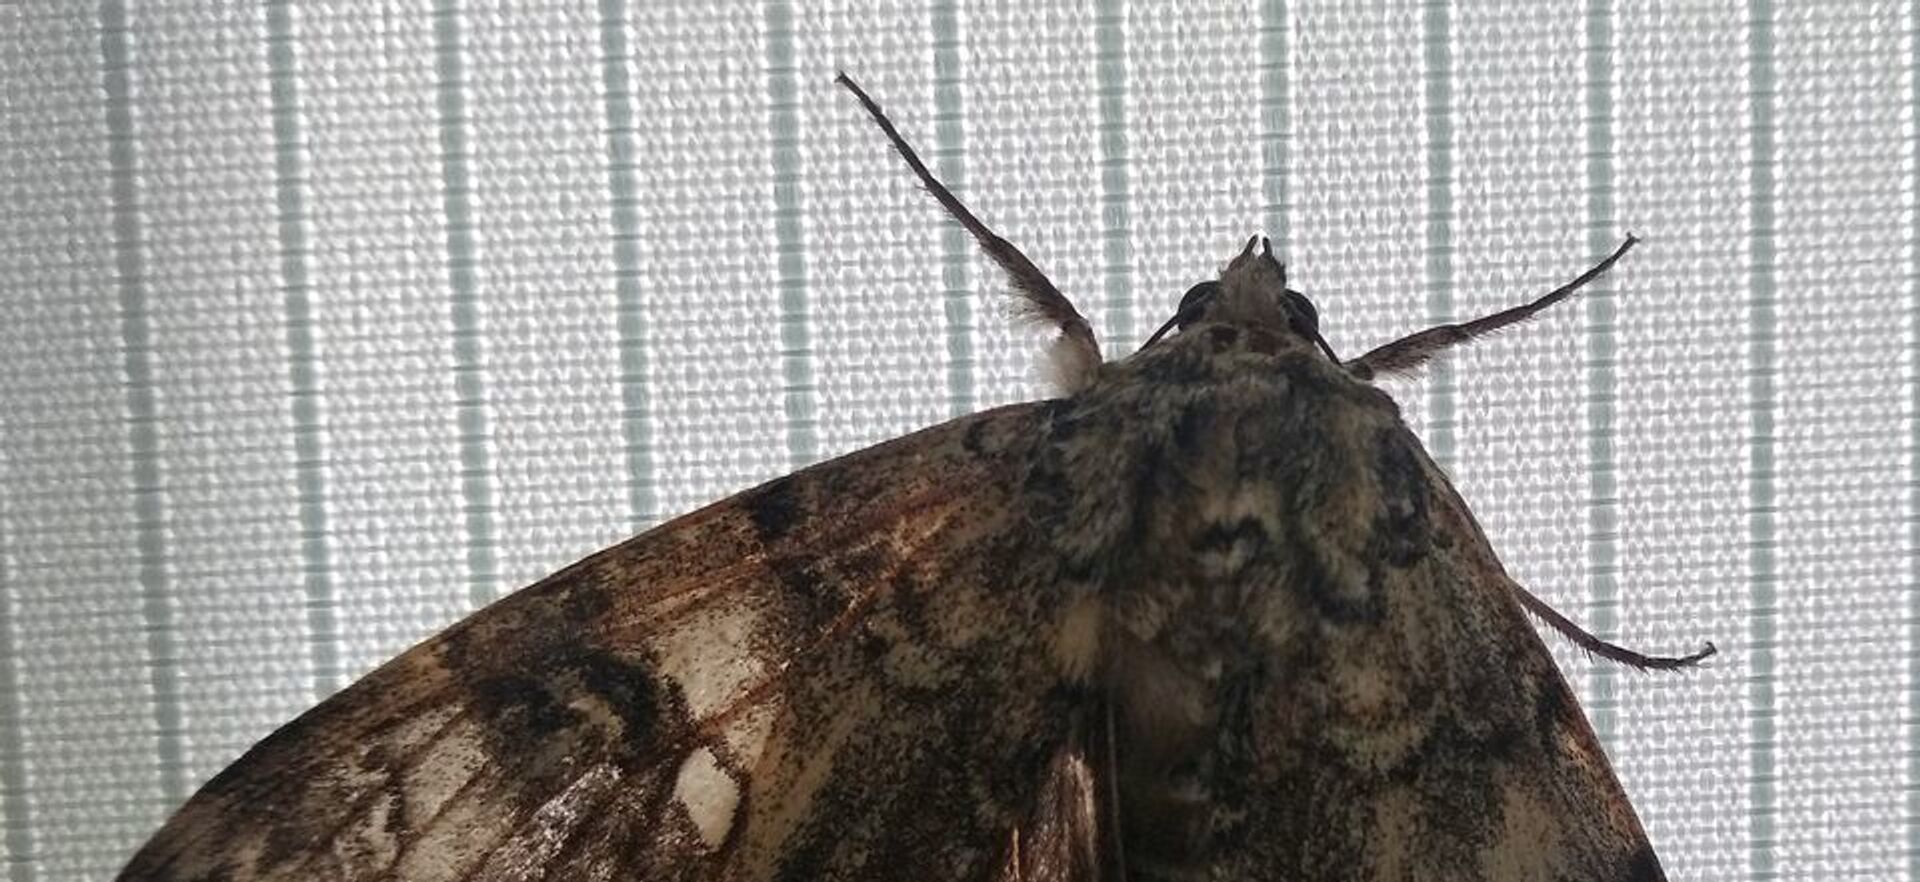 A butterfly with a wingspan the size of bird was spotted in Chernobyl exclusion zone - Sputnik International, 1920, 09.10.2020